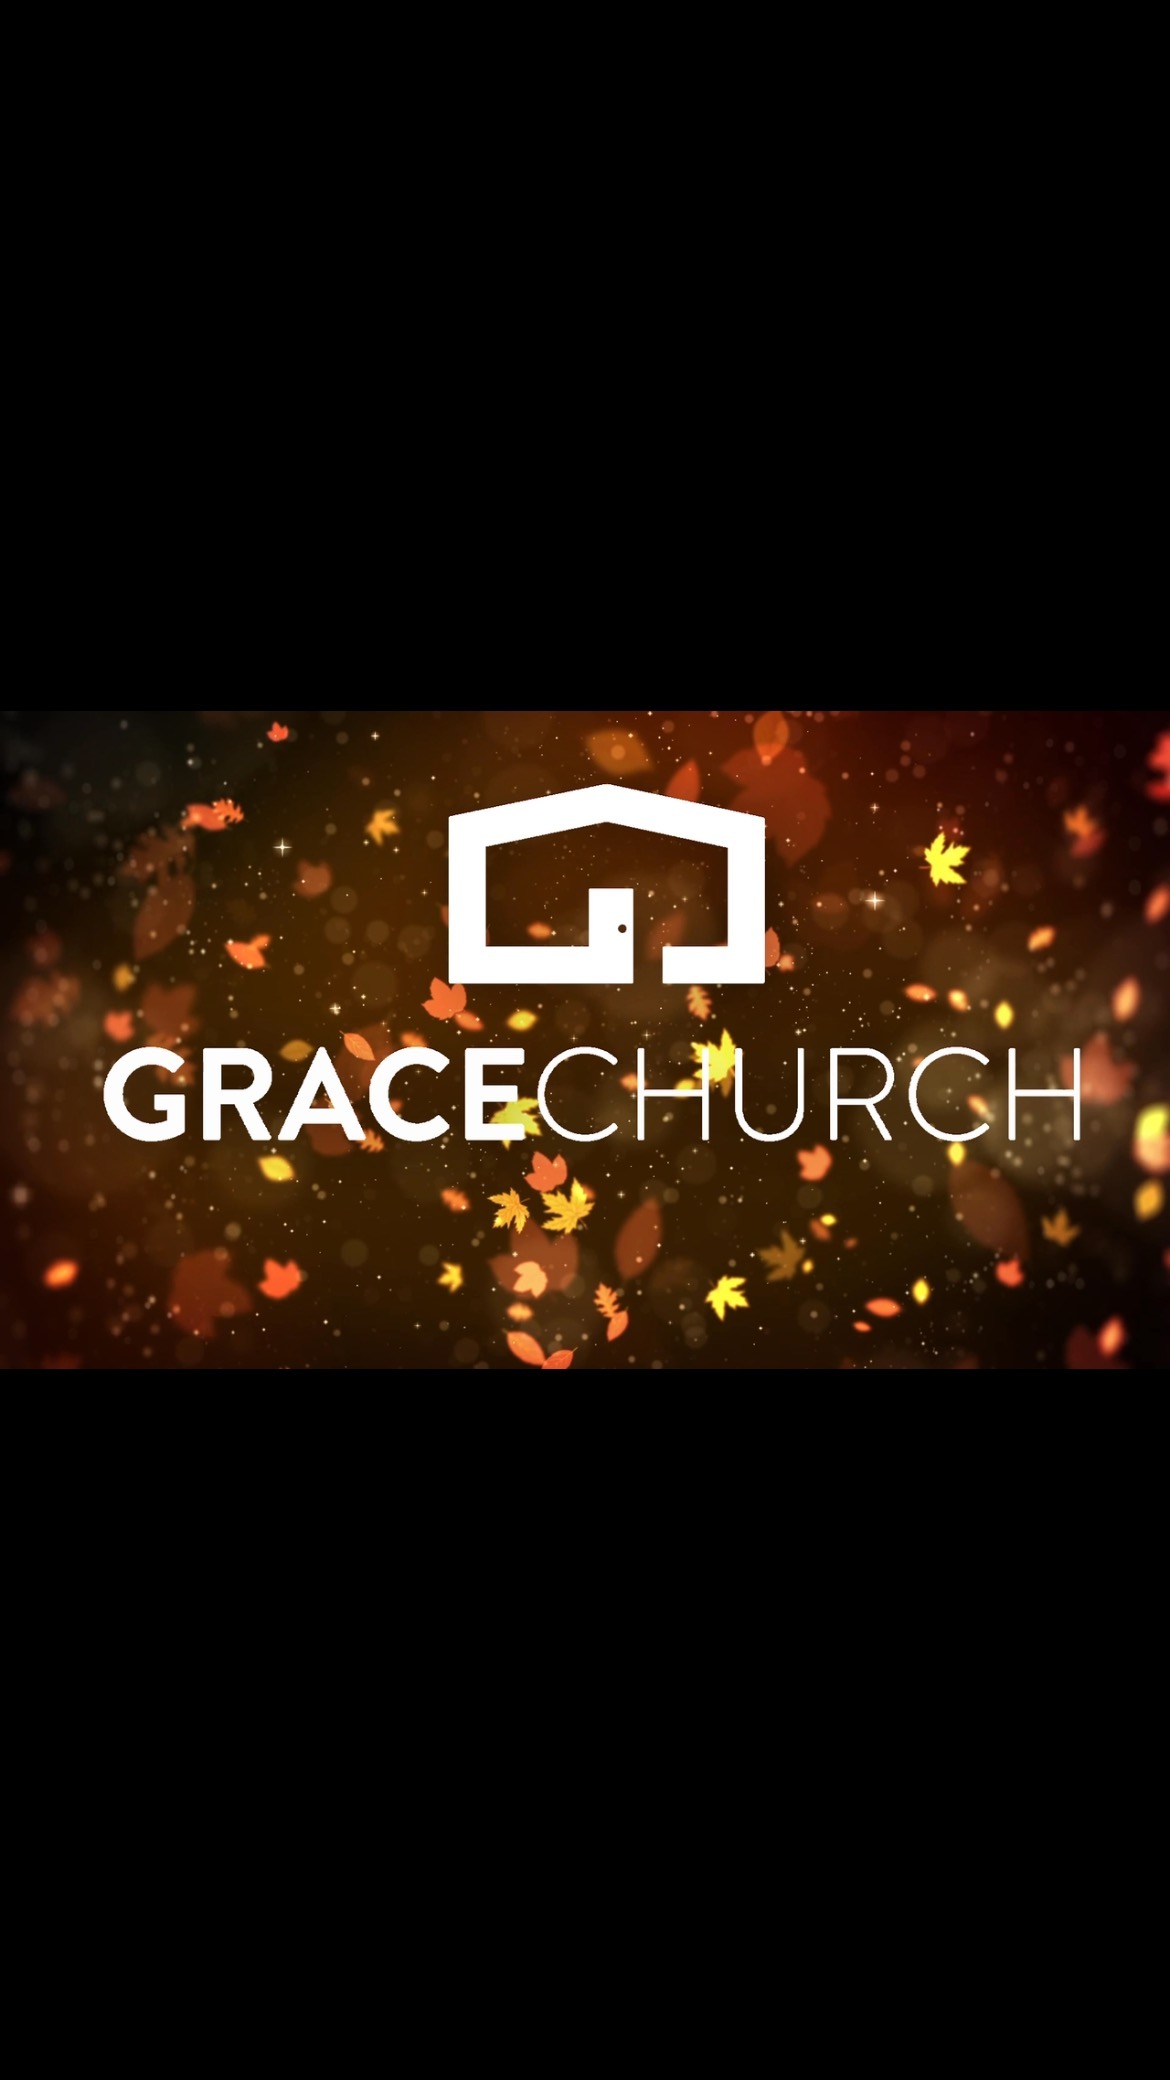 Exciting weekend here at Grace!